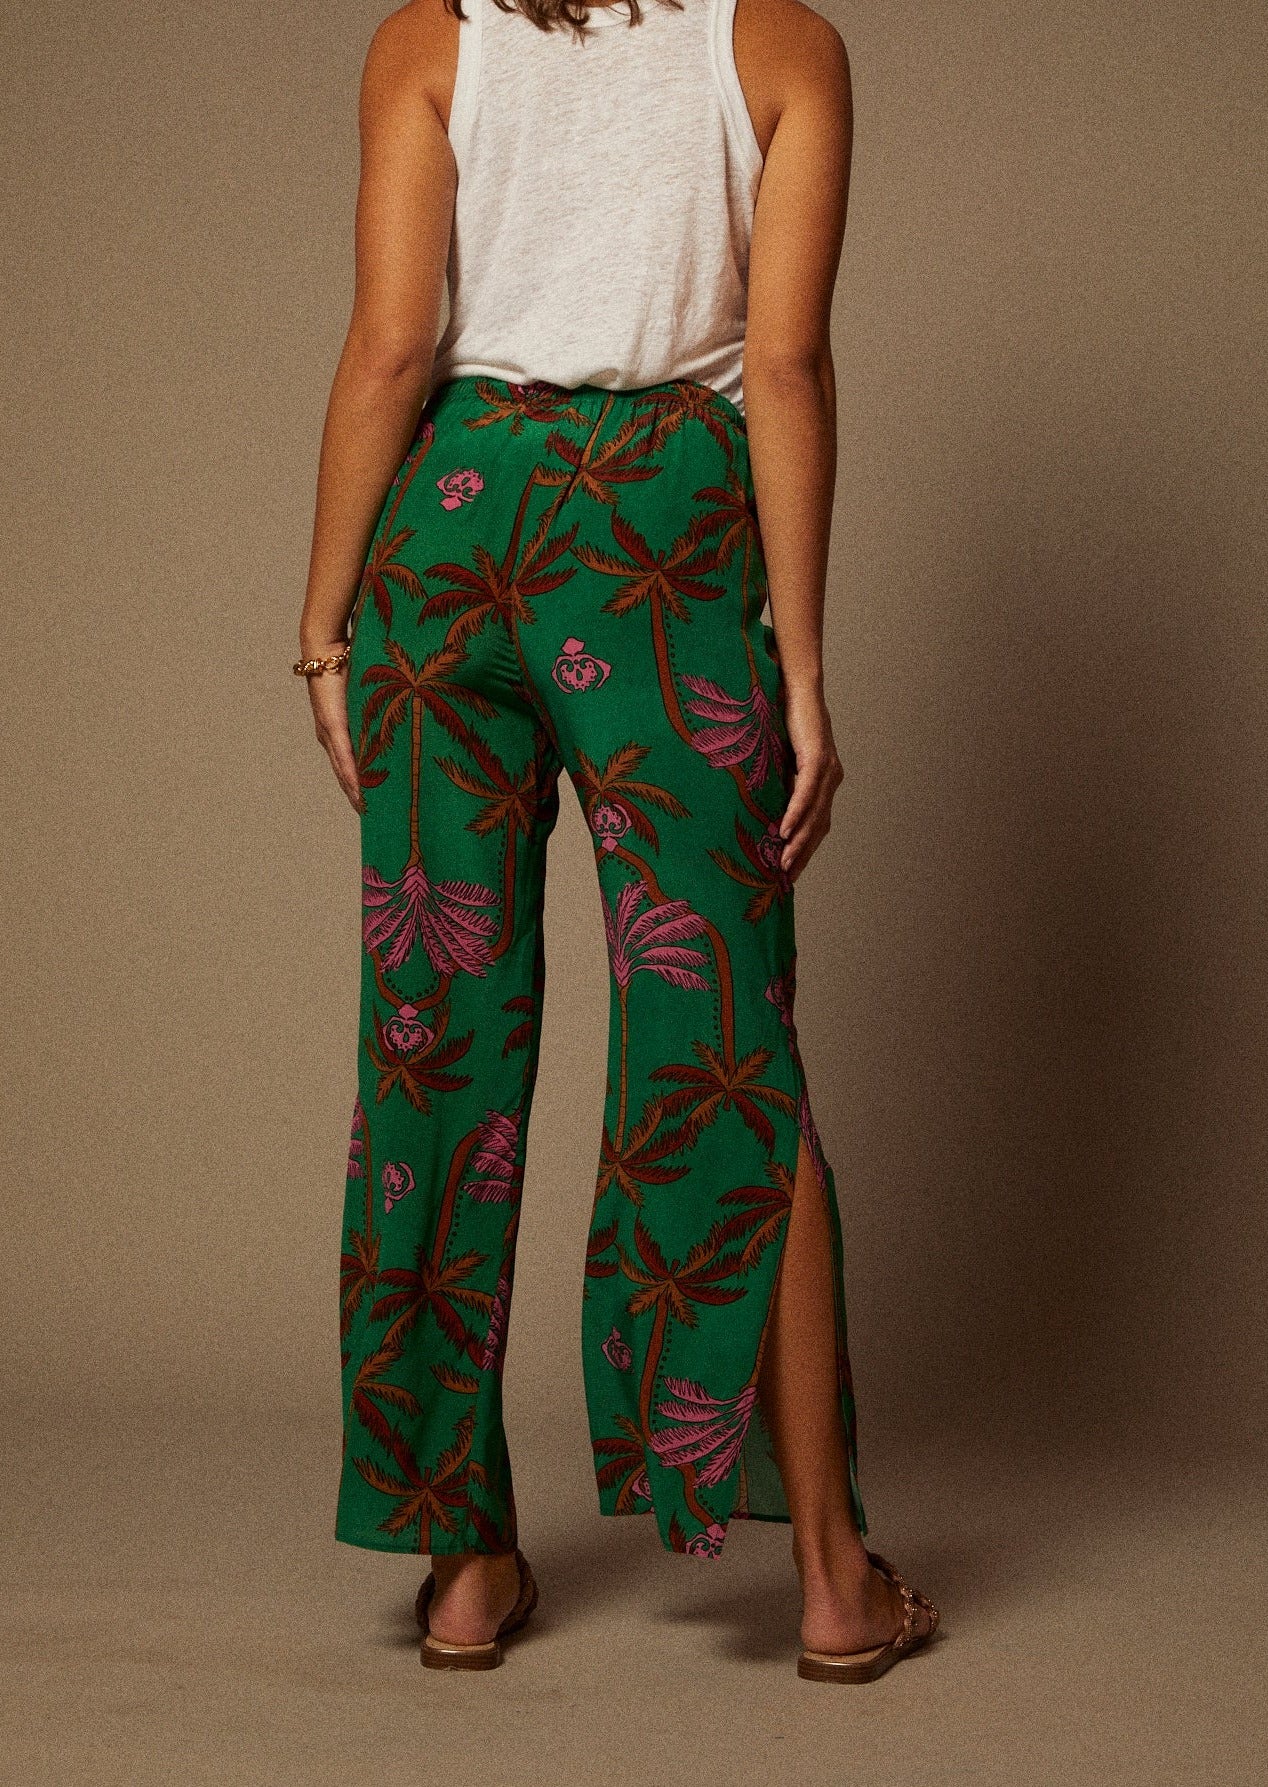 Silk Print Drawstring Wide Leg Pant with Side Slit in Palm Tree Print in Green, Brown and Pink back view